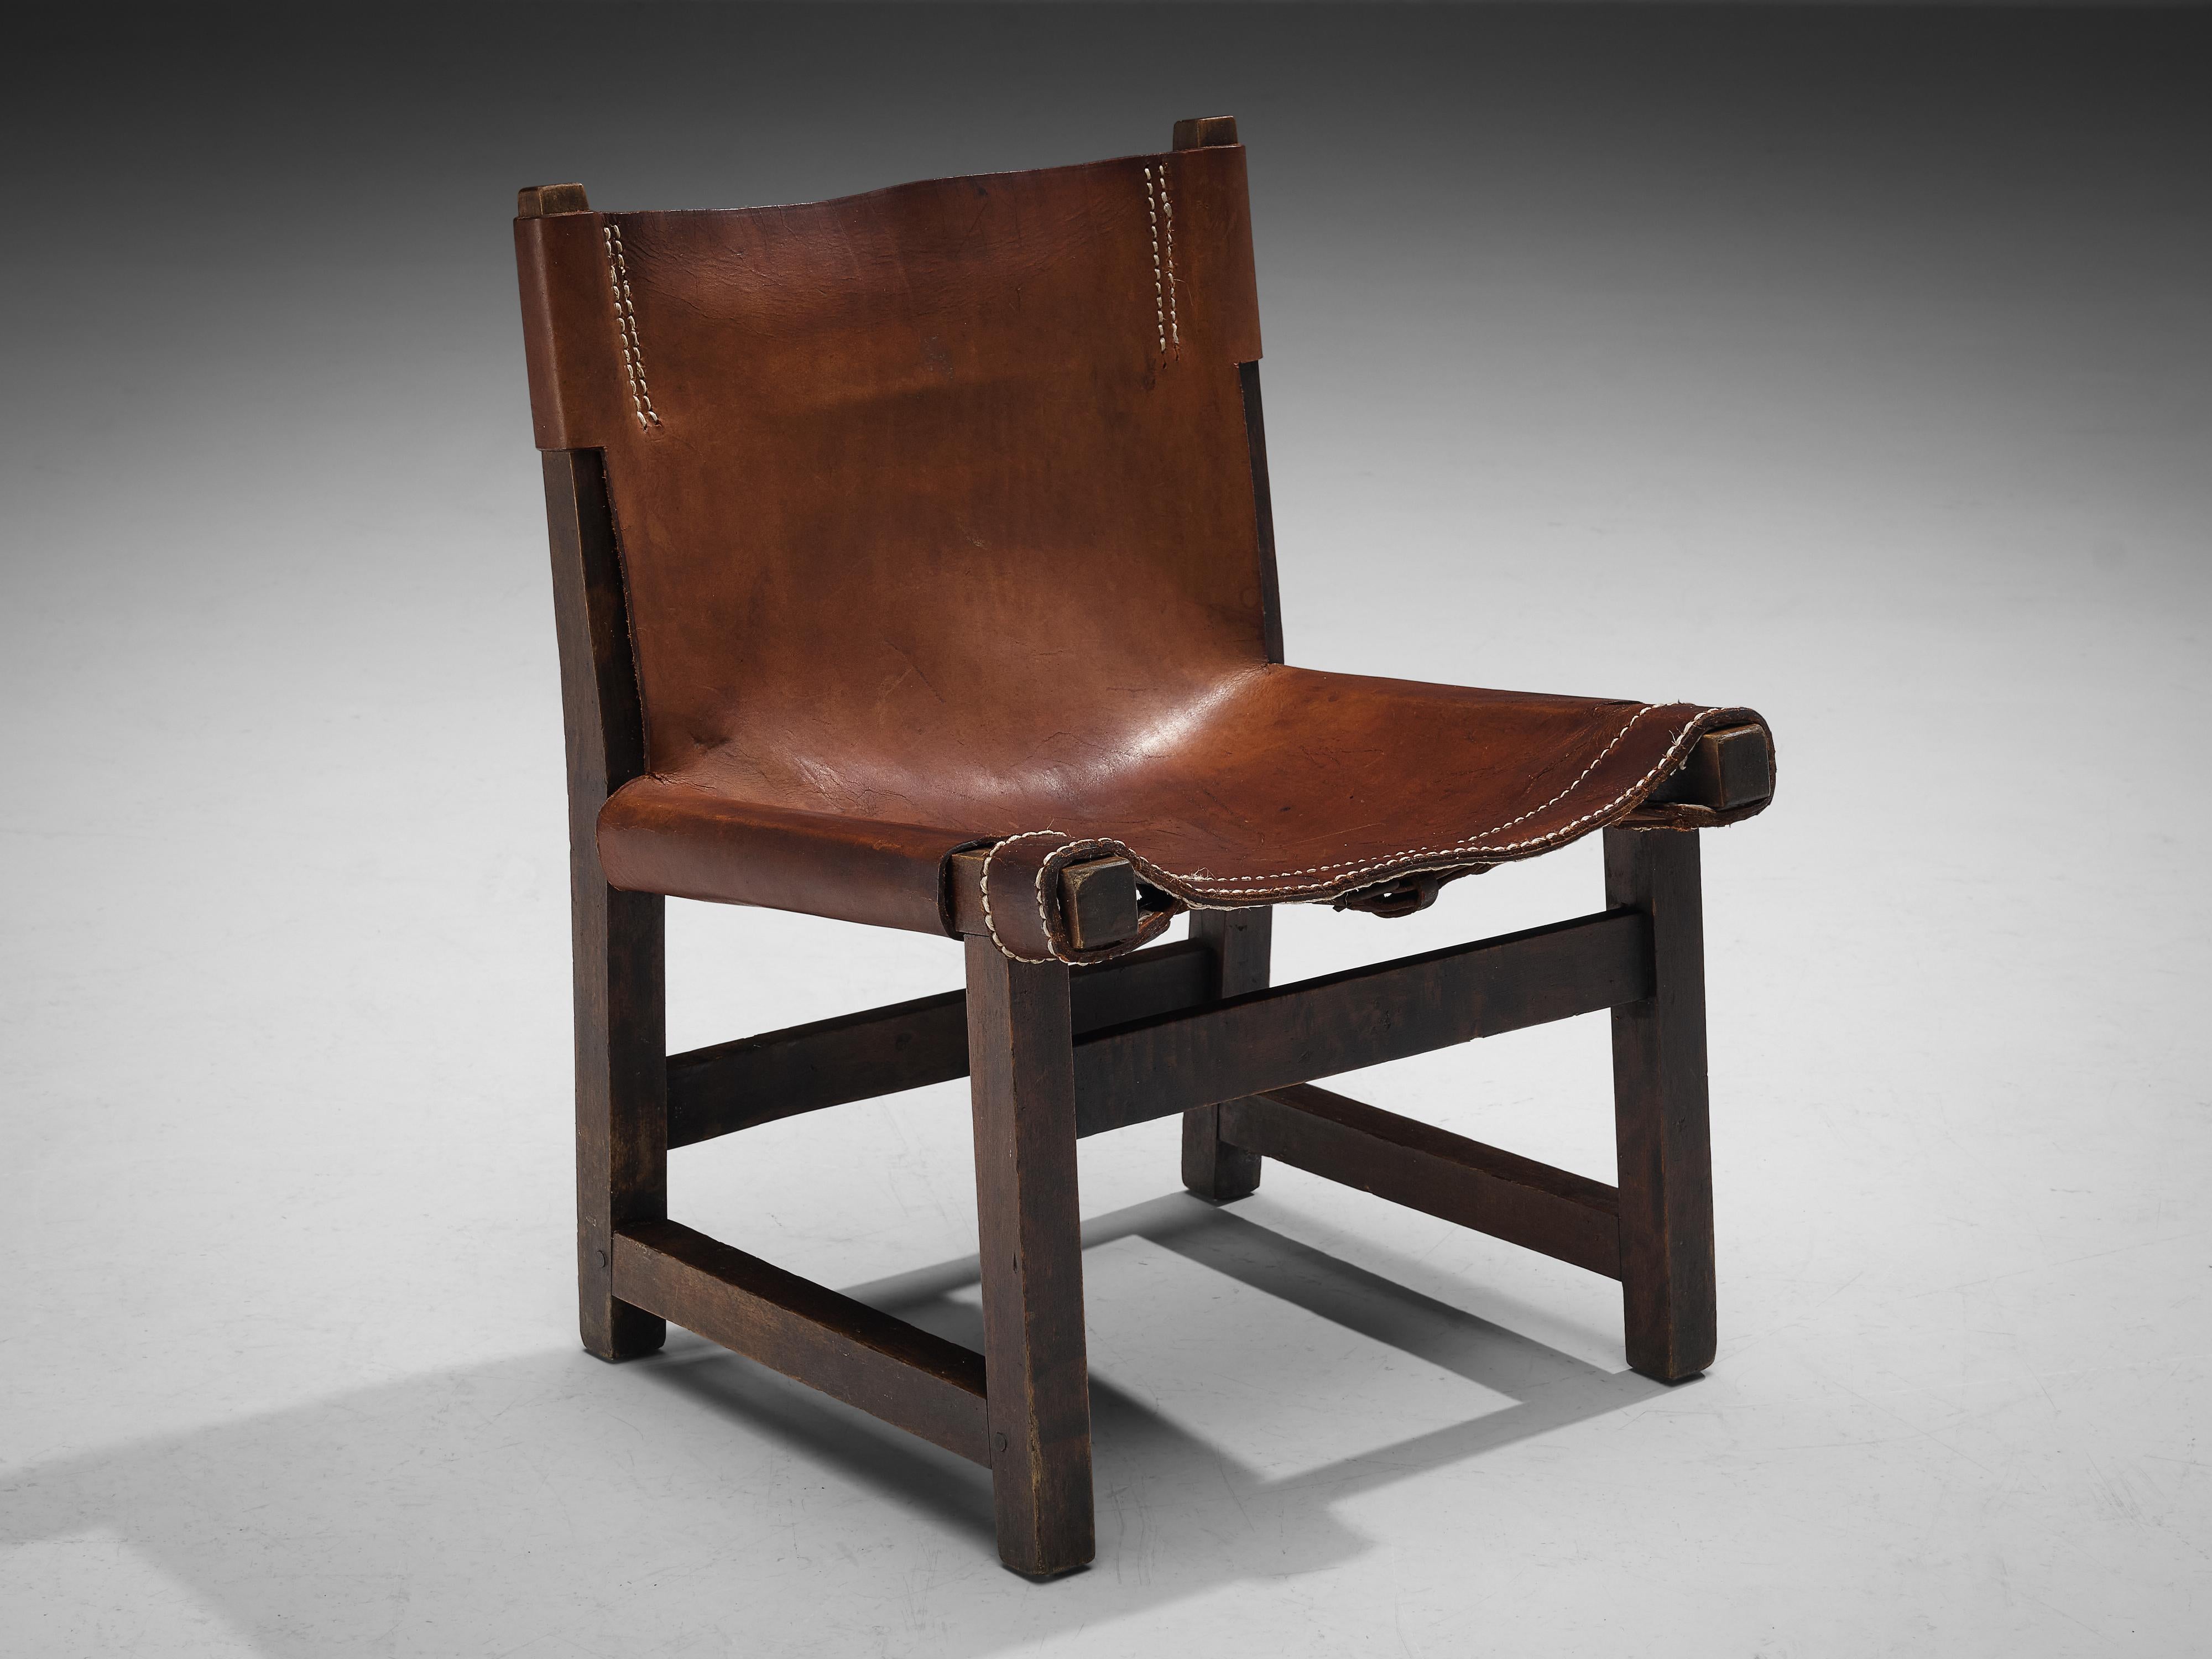 Paco Muñoz for Darro, 'Riaza' chair for children, samara, leather, metal, Spain, 1960s

This strong and sturdy low lounge chair is designed by Paco Muñoz in the 60s. The design of this hunting chair, with its leather loosely attached to the frame by